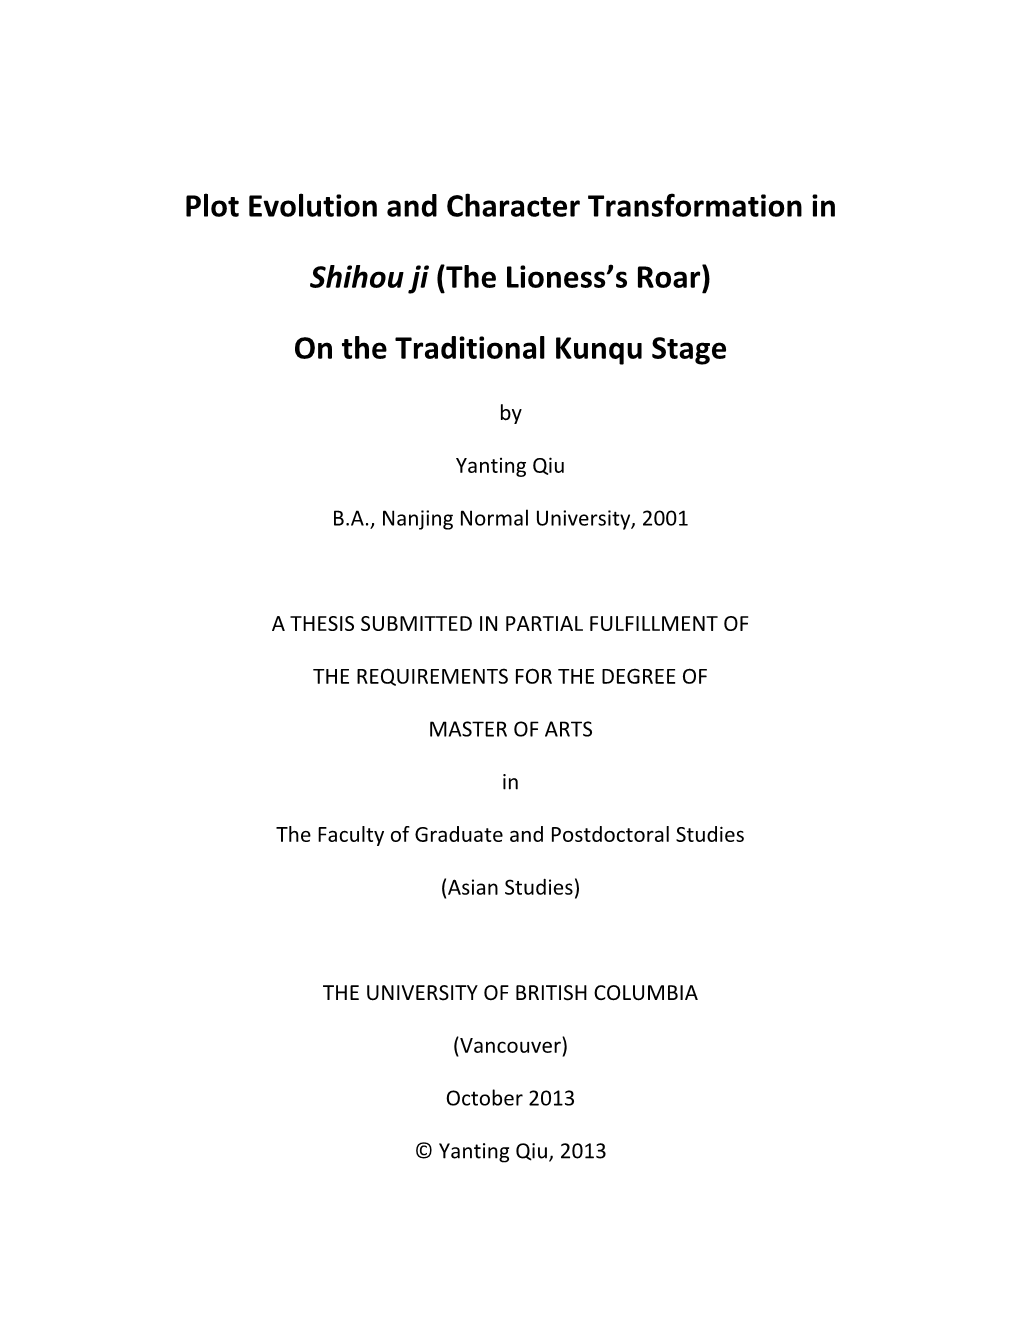 Plot Evolution and Character Transformation in Shihou Ji (The